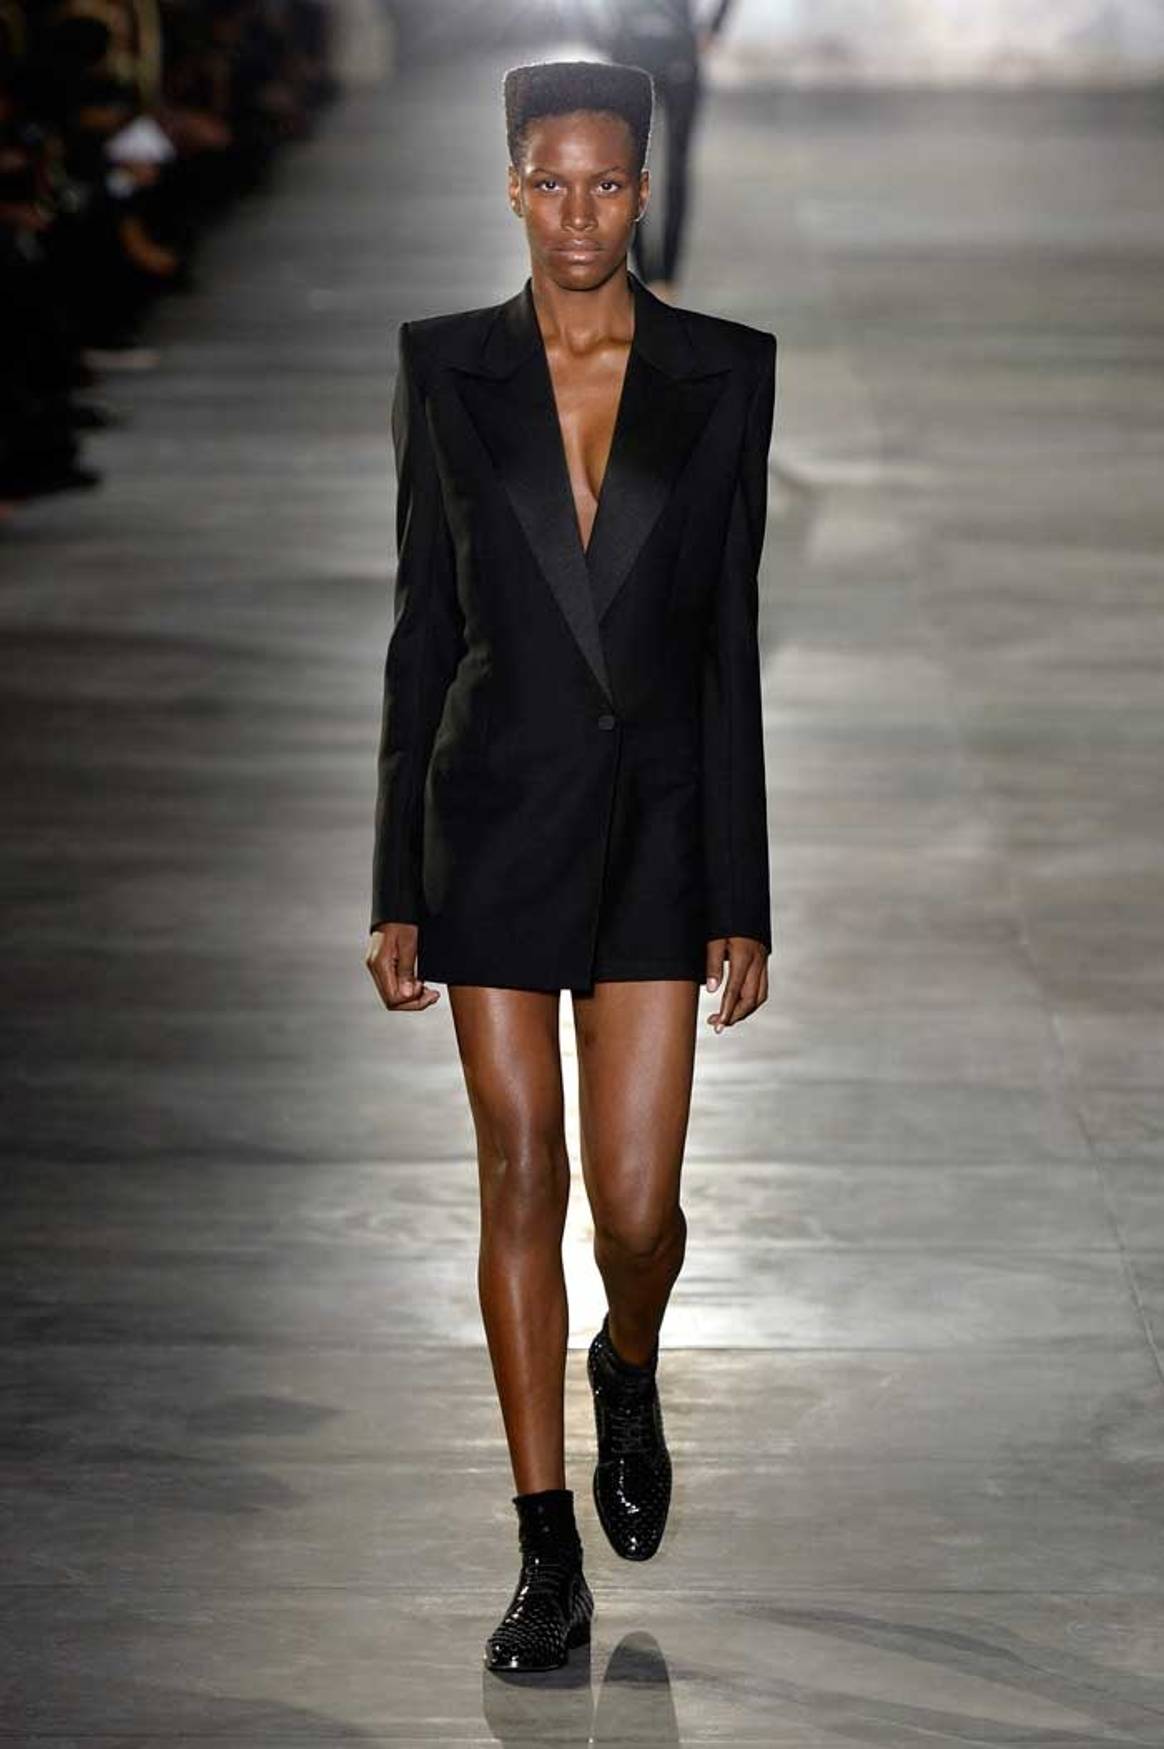 Vaccarello goes all leather out for Saint Laurent at PFW